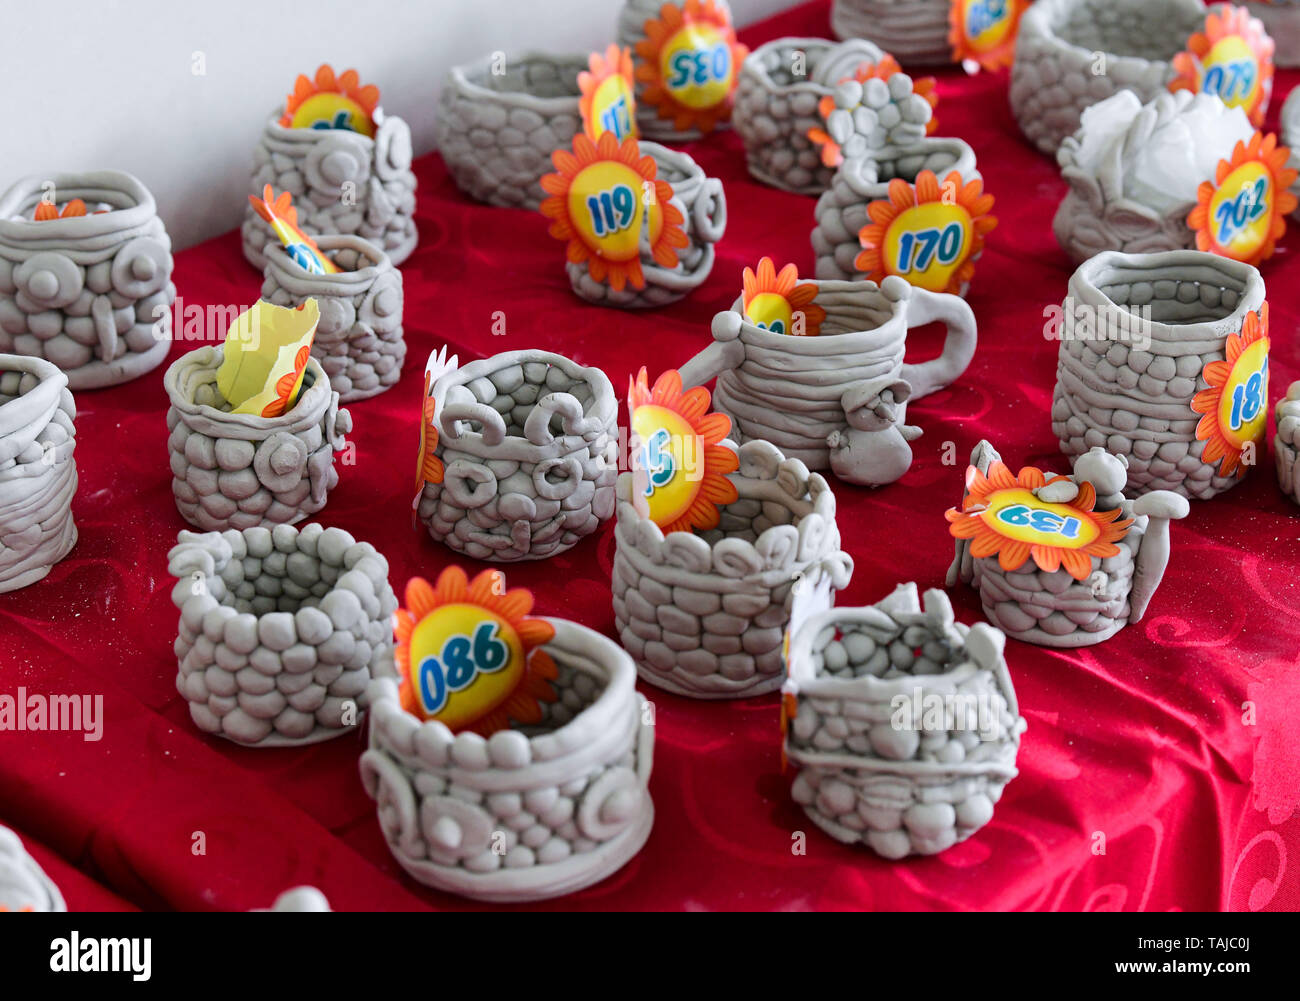 Cixi. 25th May, 2019. Photo taken on May 25, 2019 shows the pottery wares made by pupils in Cixi City, east China's Zhejiang Province. A volunteer center in Cixi City opened a pottery class for local pupils in celebration of the upcoming International Children's Day. Credit: Xu Yu/Xinhua/Alamy Live News Stock Photo